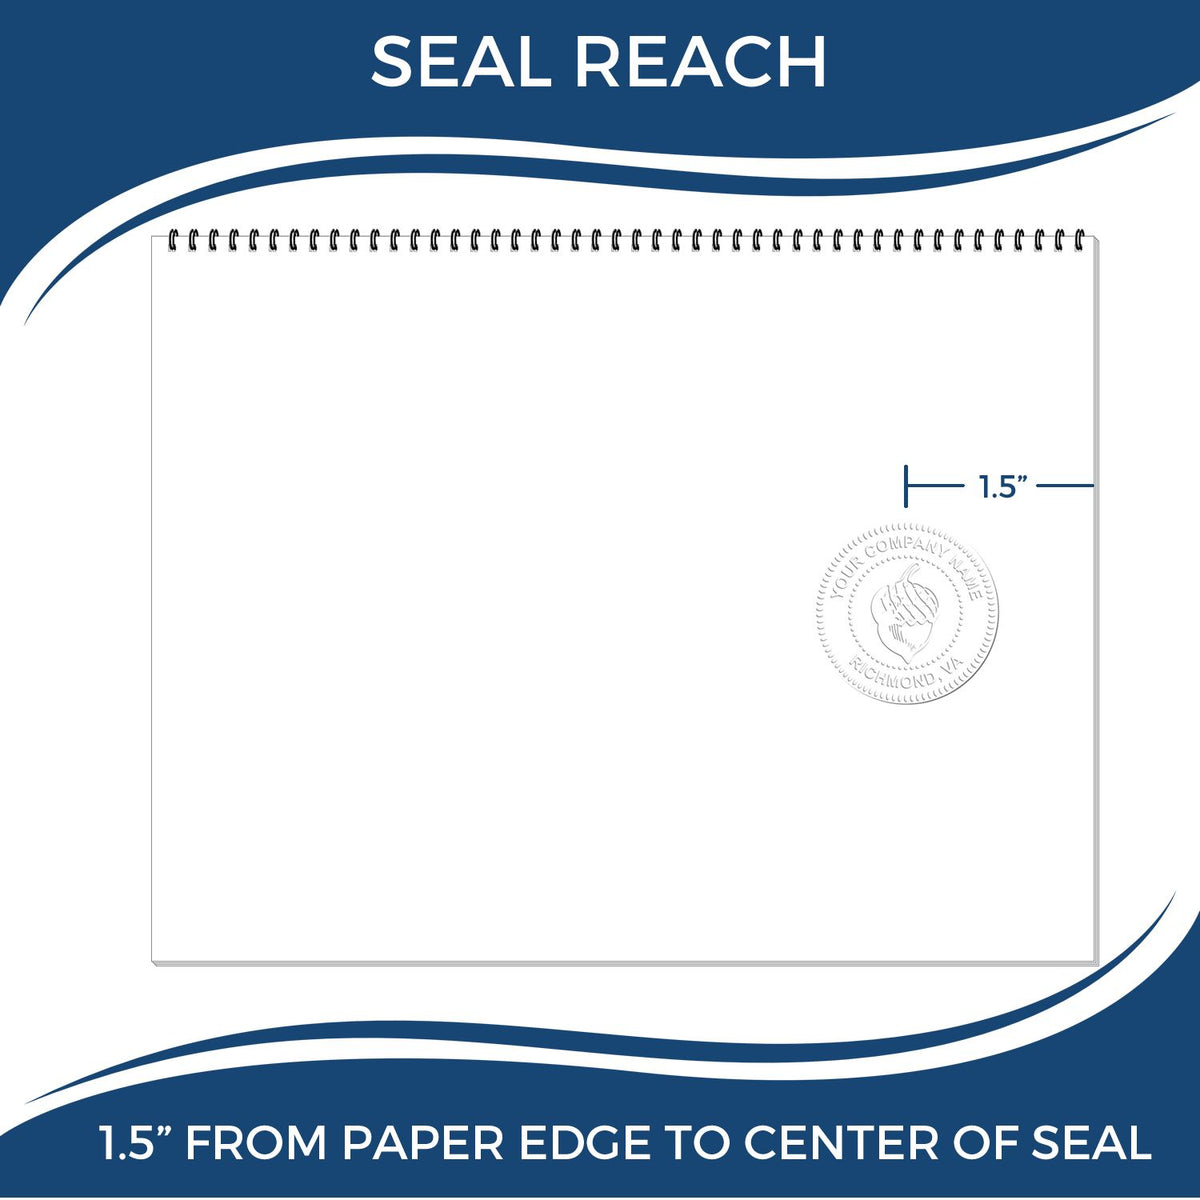 An infographic showing the seal reach which is represented by a ruler and a miniature seal image of the Soft North Dakota Professional Geologist Seal